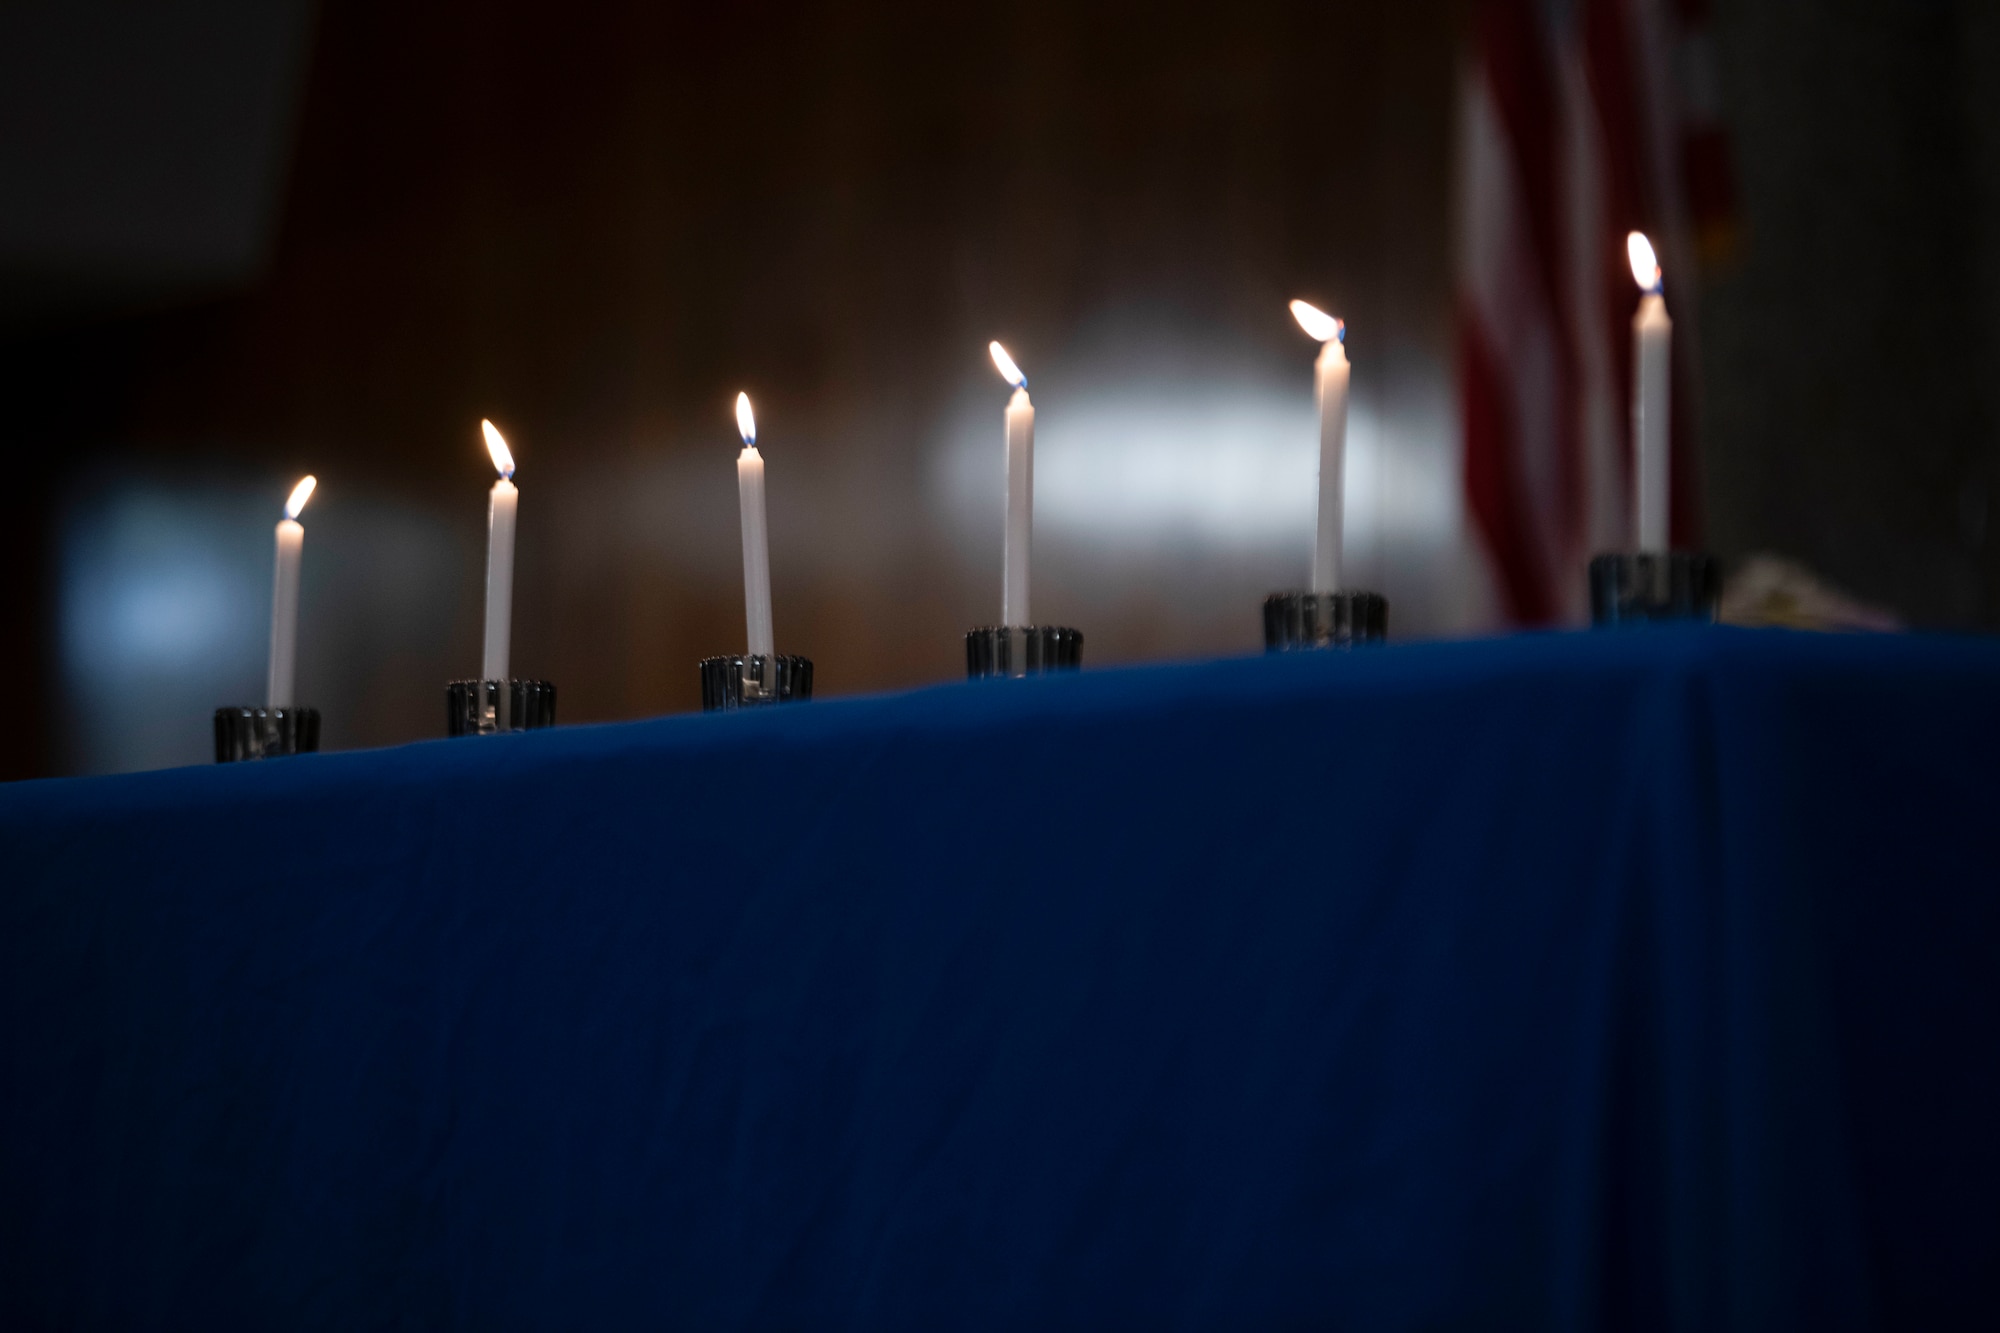 Six lit candles are displayed on a blue tableclothed table.